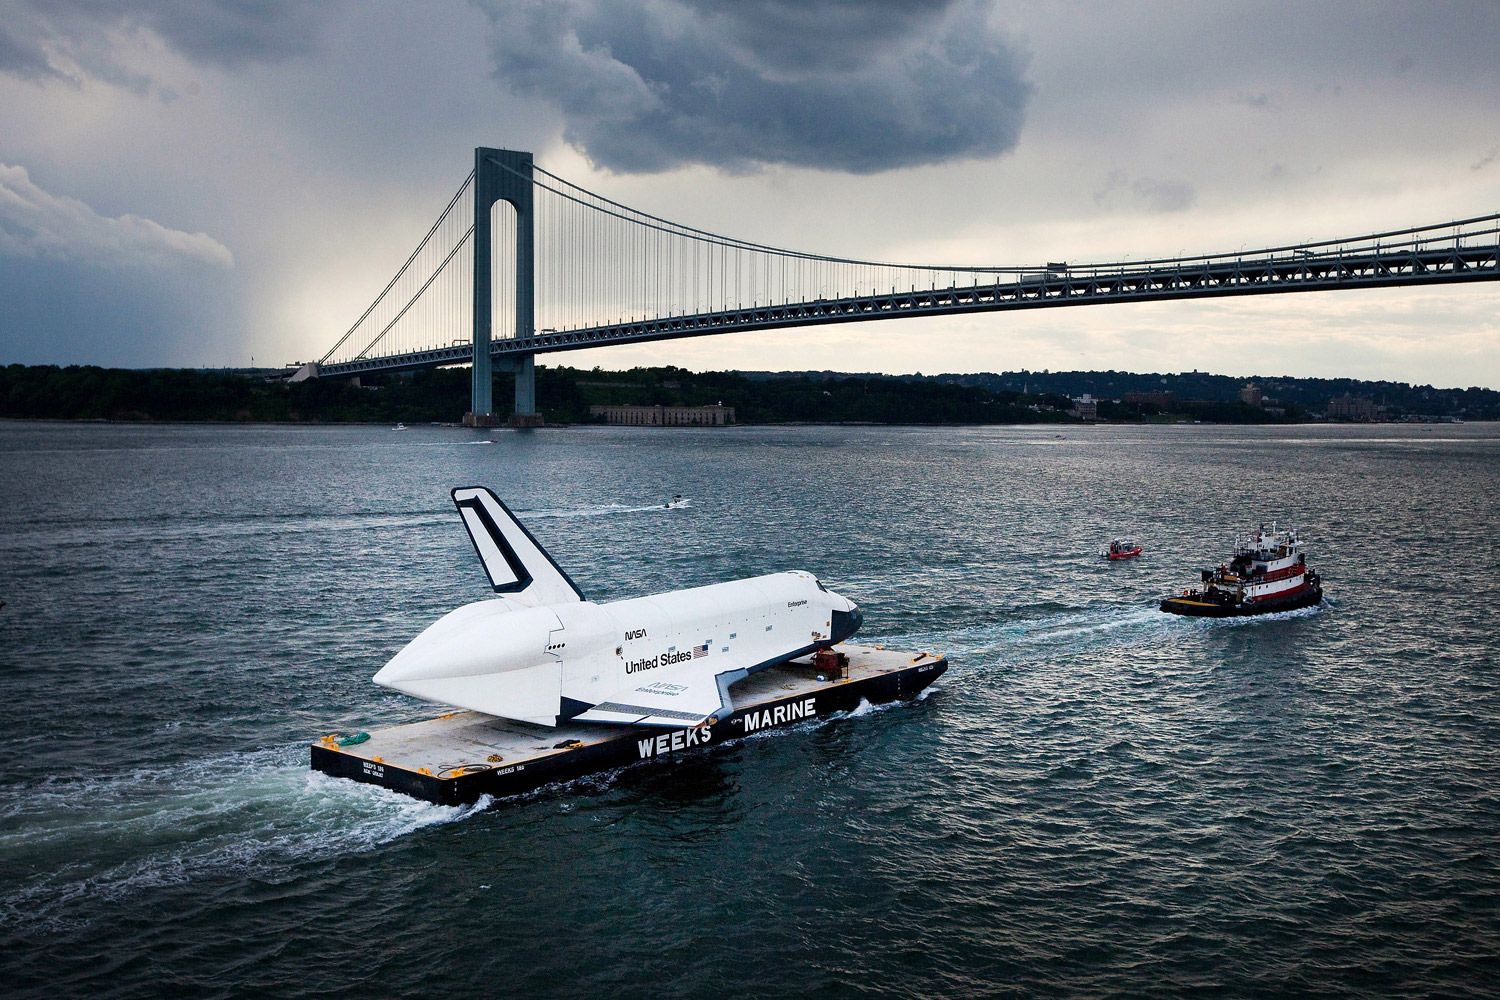 June 3, 2012. The space shuttle Enterprise is carried by barge underneath the Verrazano-Narrows Bridge in New York City.  Enterprise is on its way to the Intrepid Sea, Air and Space Museum, where it will be put on permanent display.